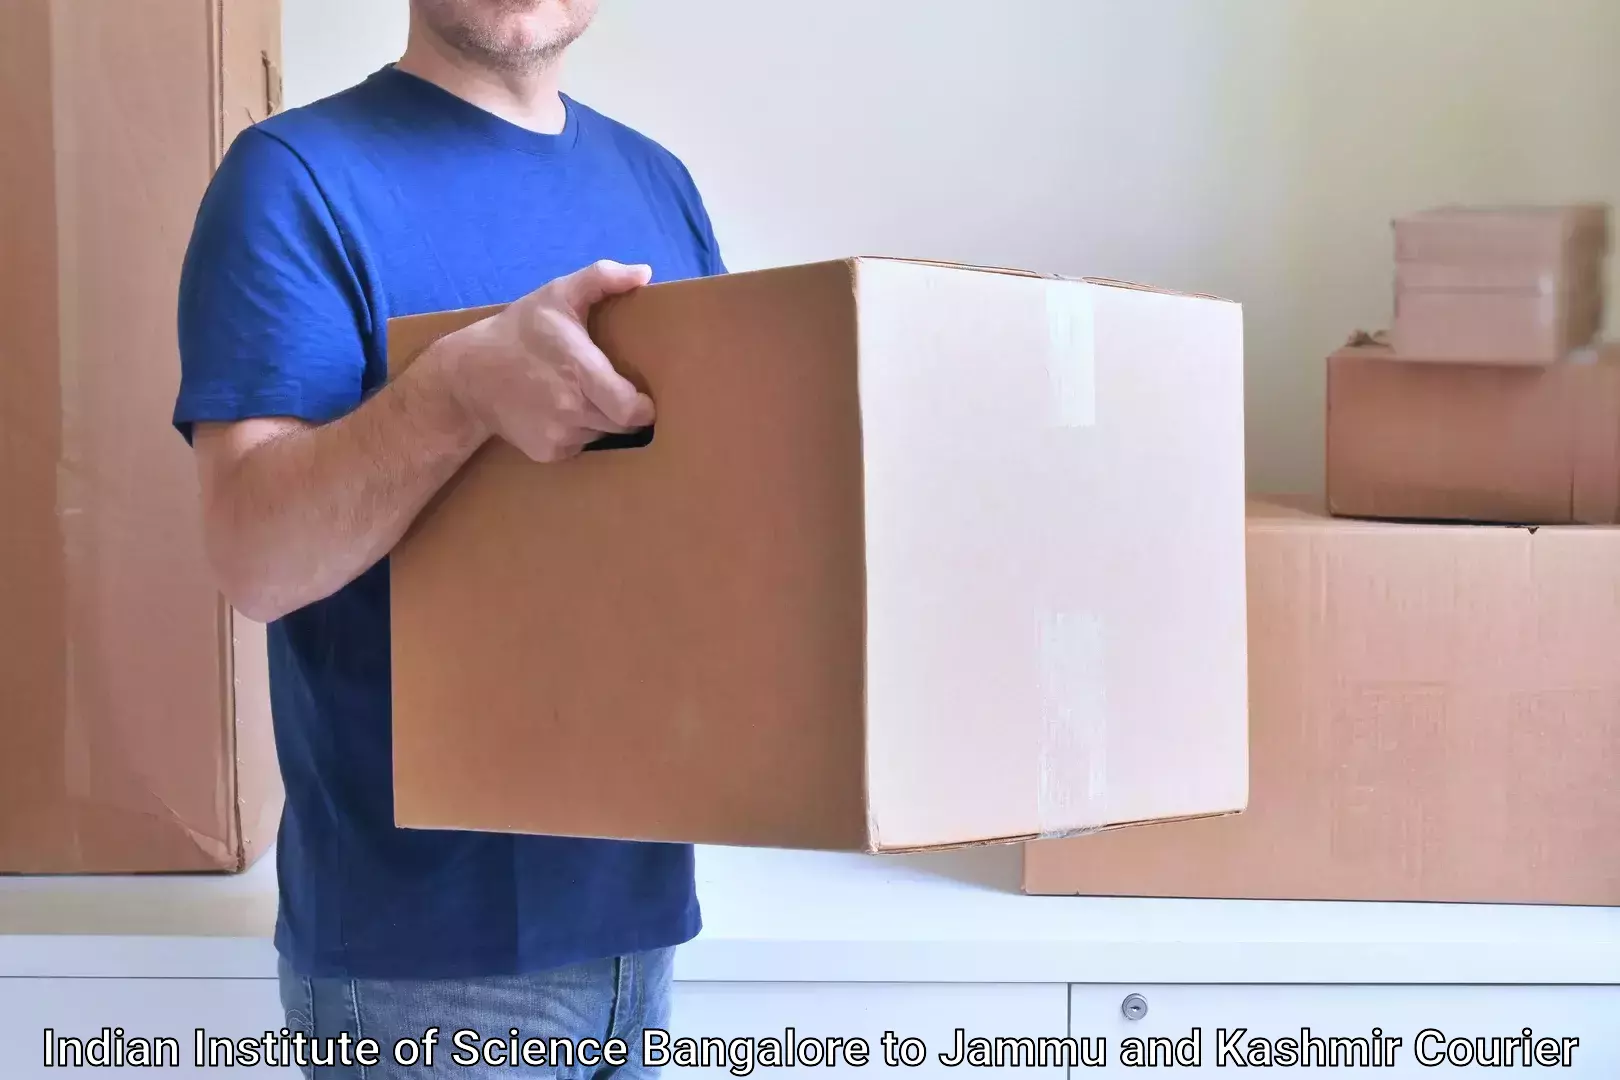 Custom courier packaging Indian Institute of Science Bangalore to Jammu and Kashmir